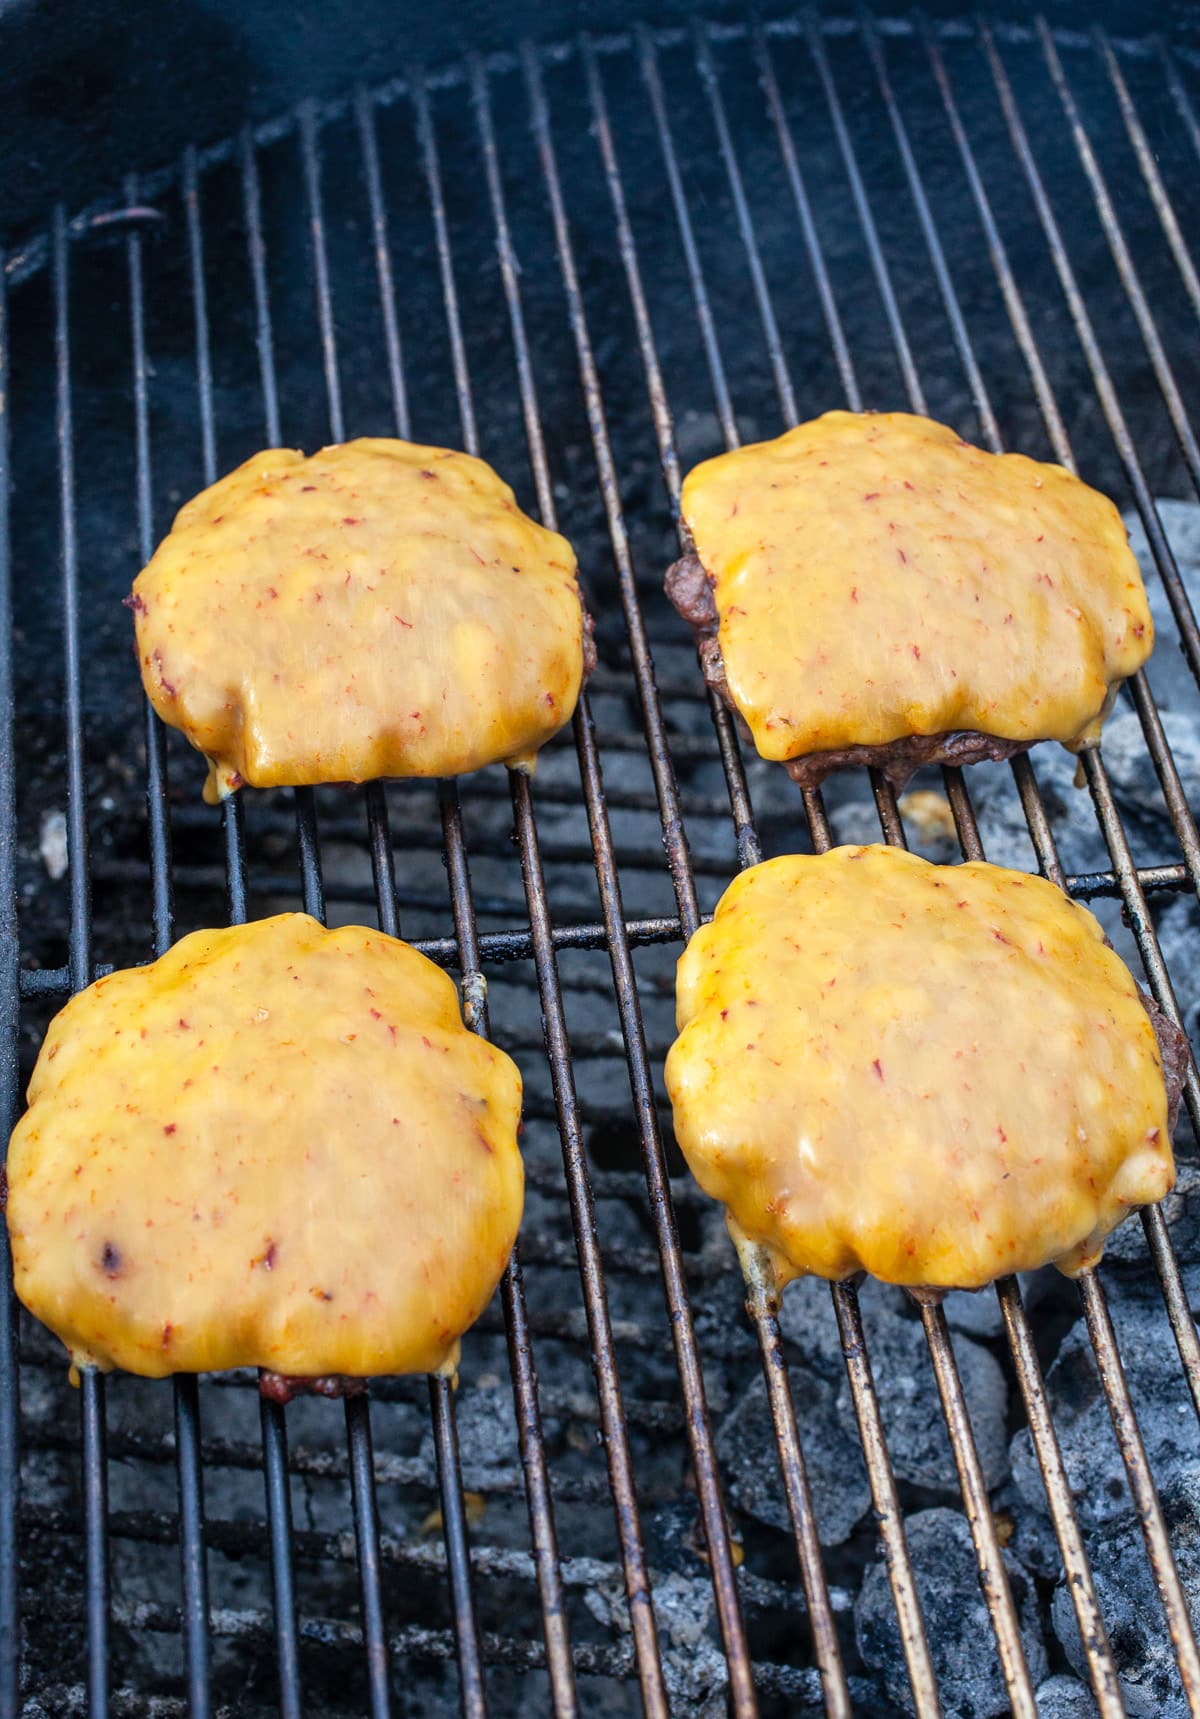 Grilled burgers with cheese on charcoal grill.